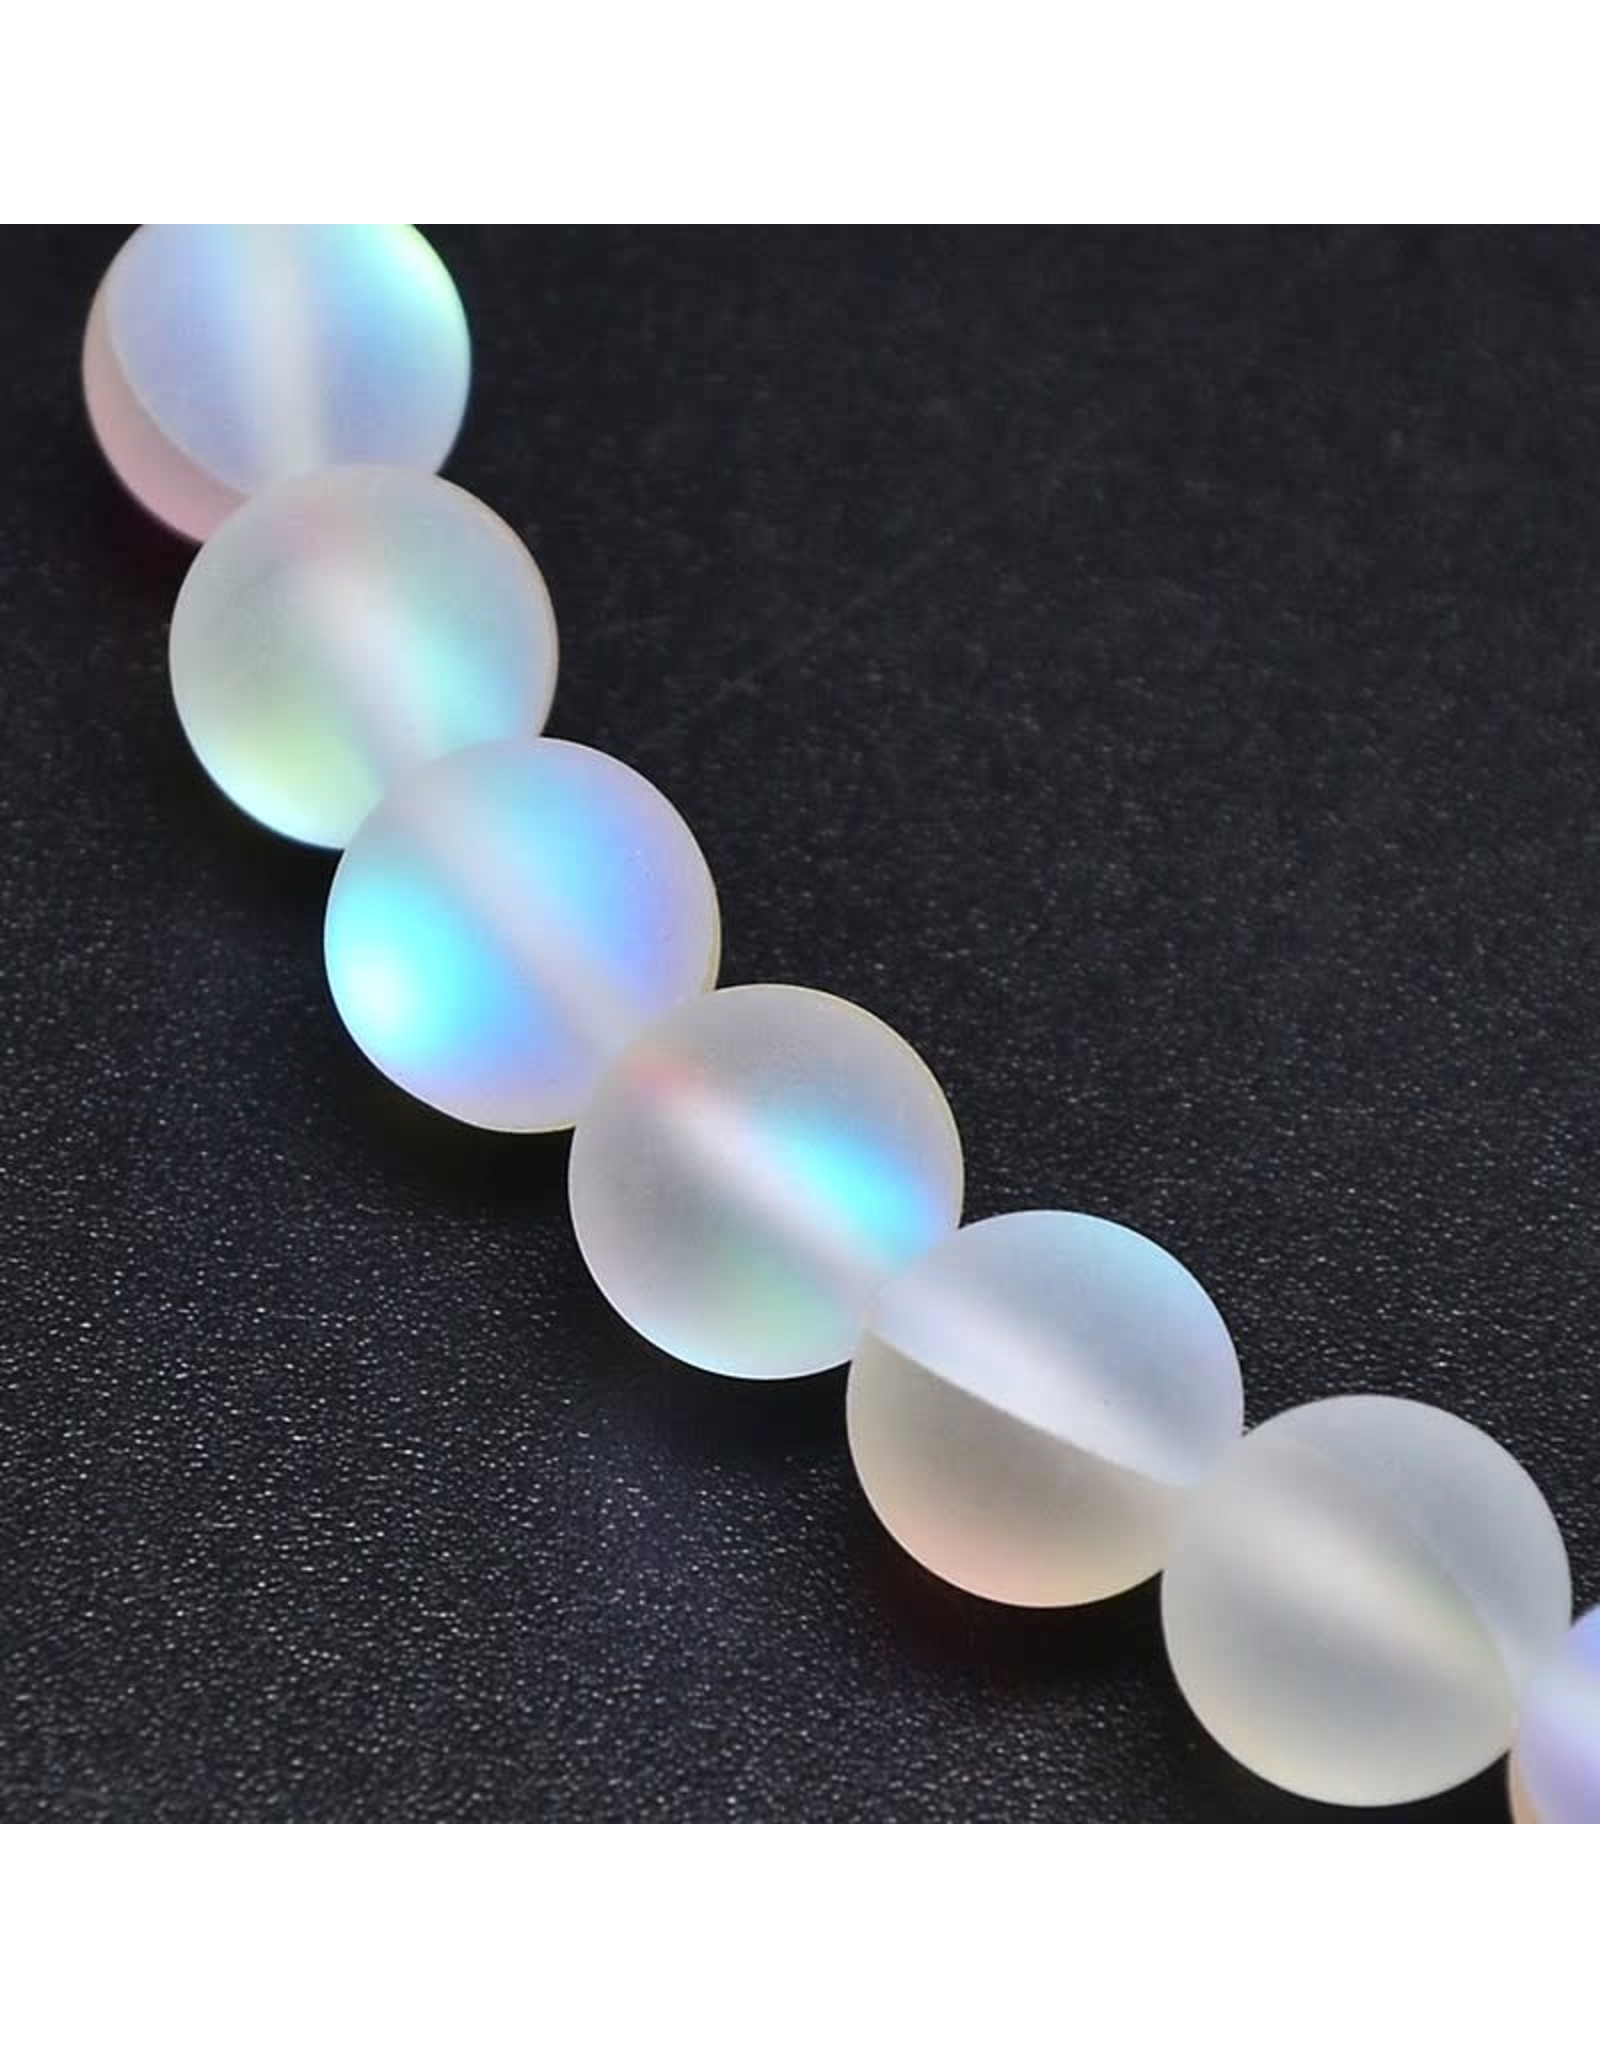 Synthetic Moonstone  10mm Clear AB Matte  15"  Strand  approx  x35 Beads